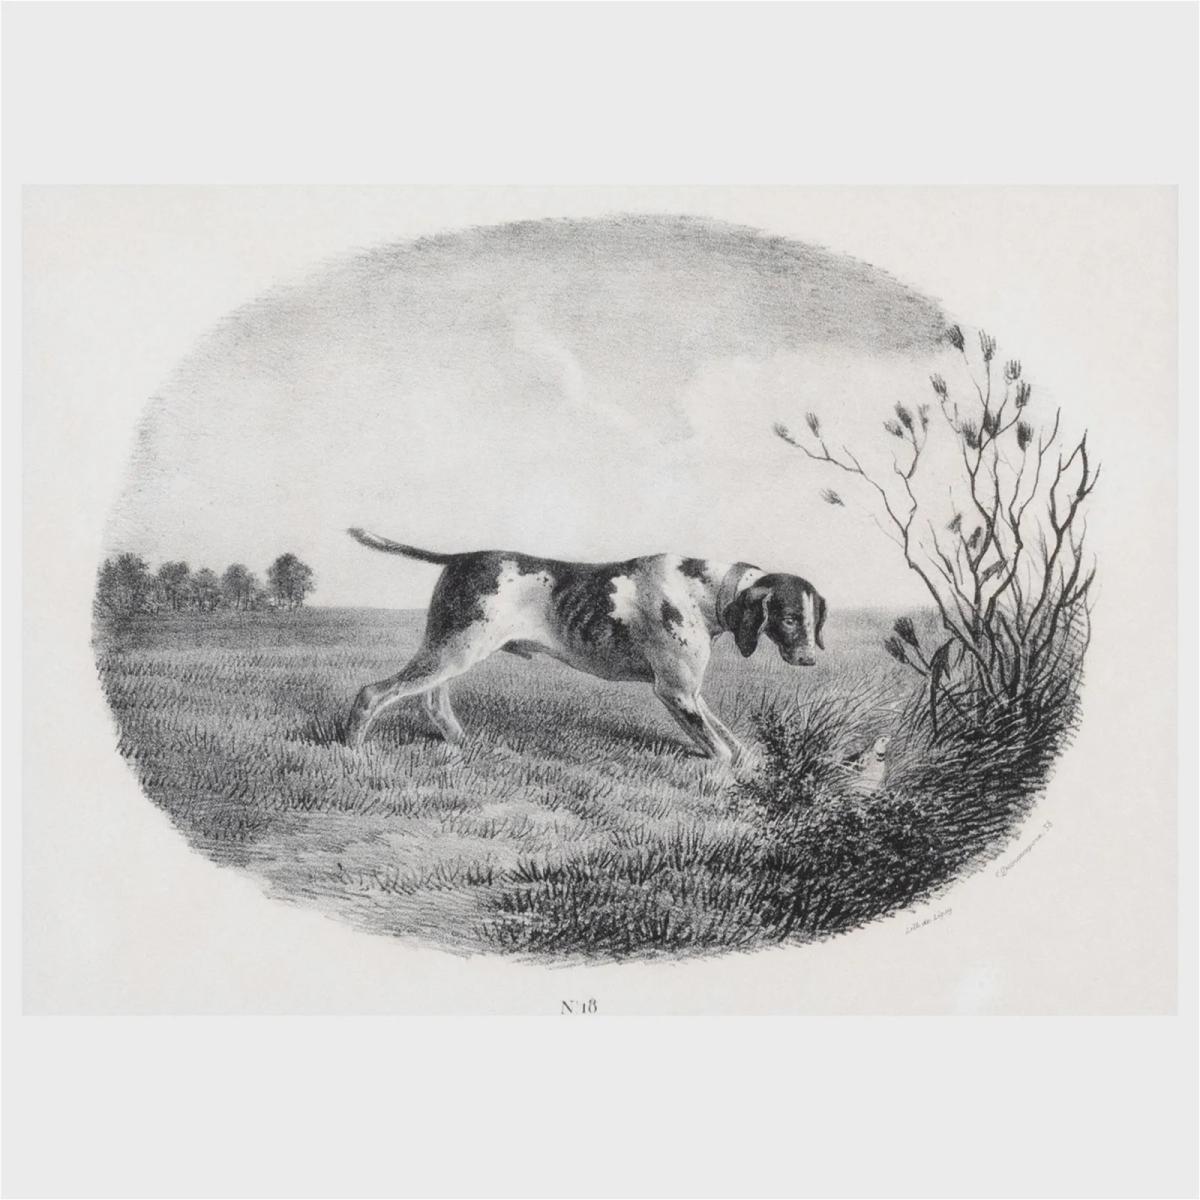 Black and White Engravings of Hunting Dogs